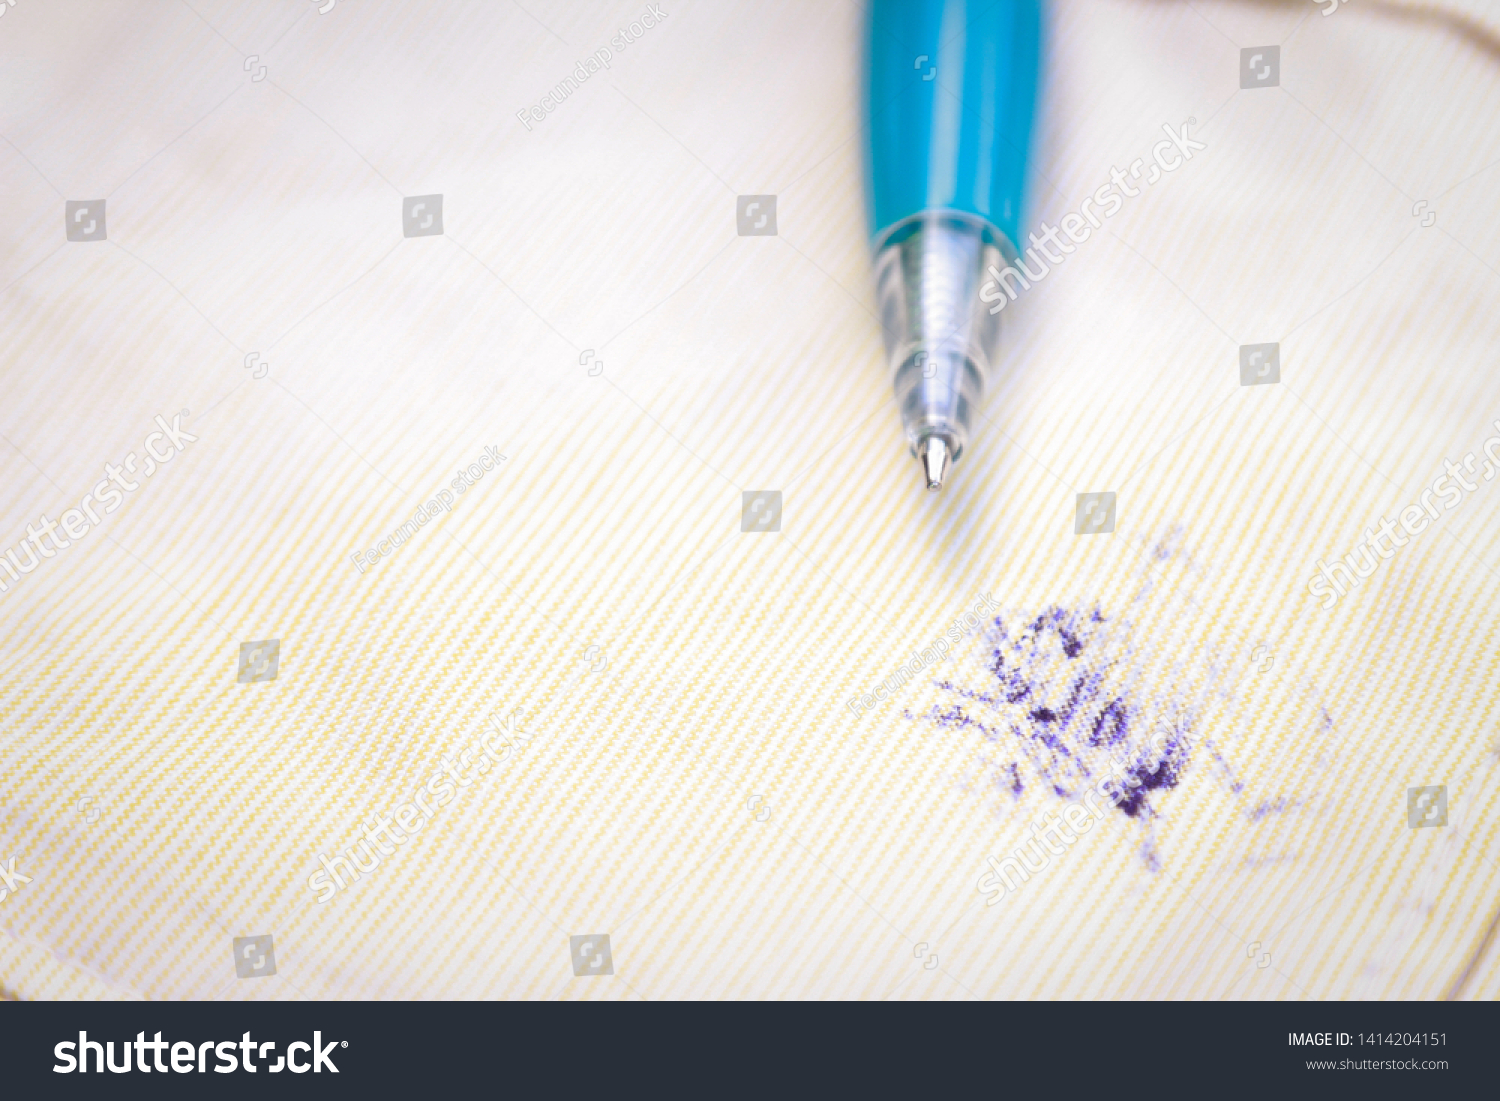 Dirty ink pen stain on fabric from accident in daily life. dirt stains for cleaning work house  #1414204151